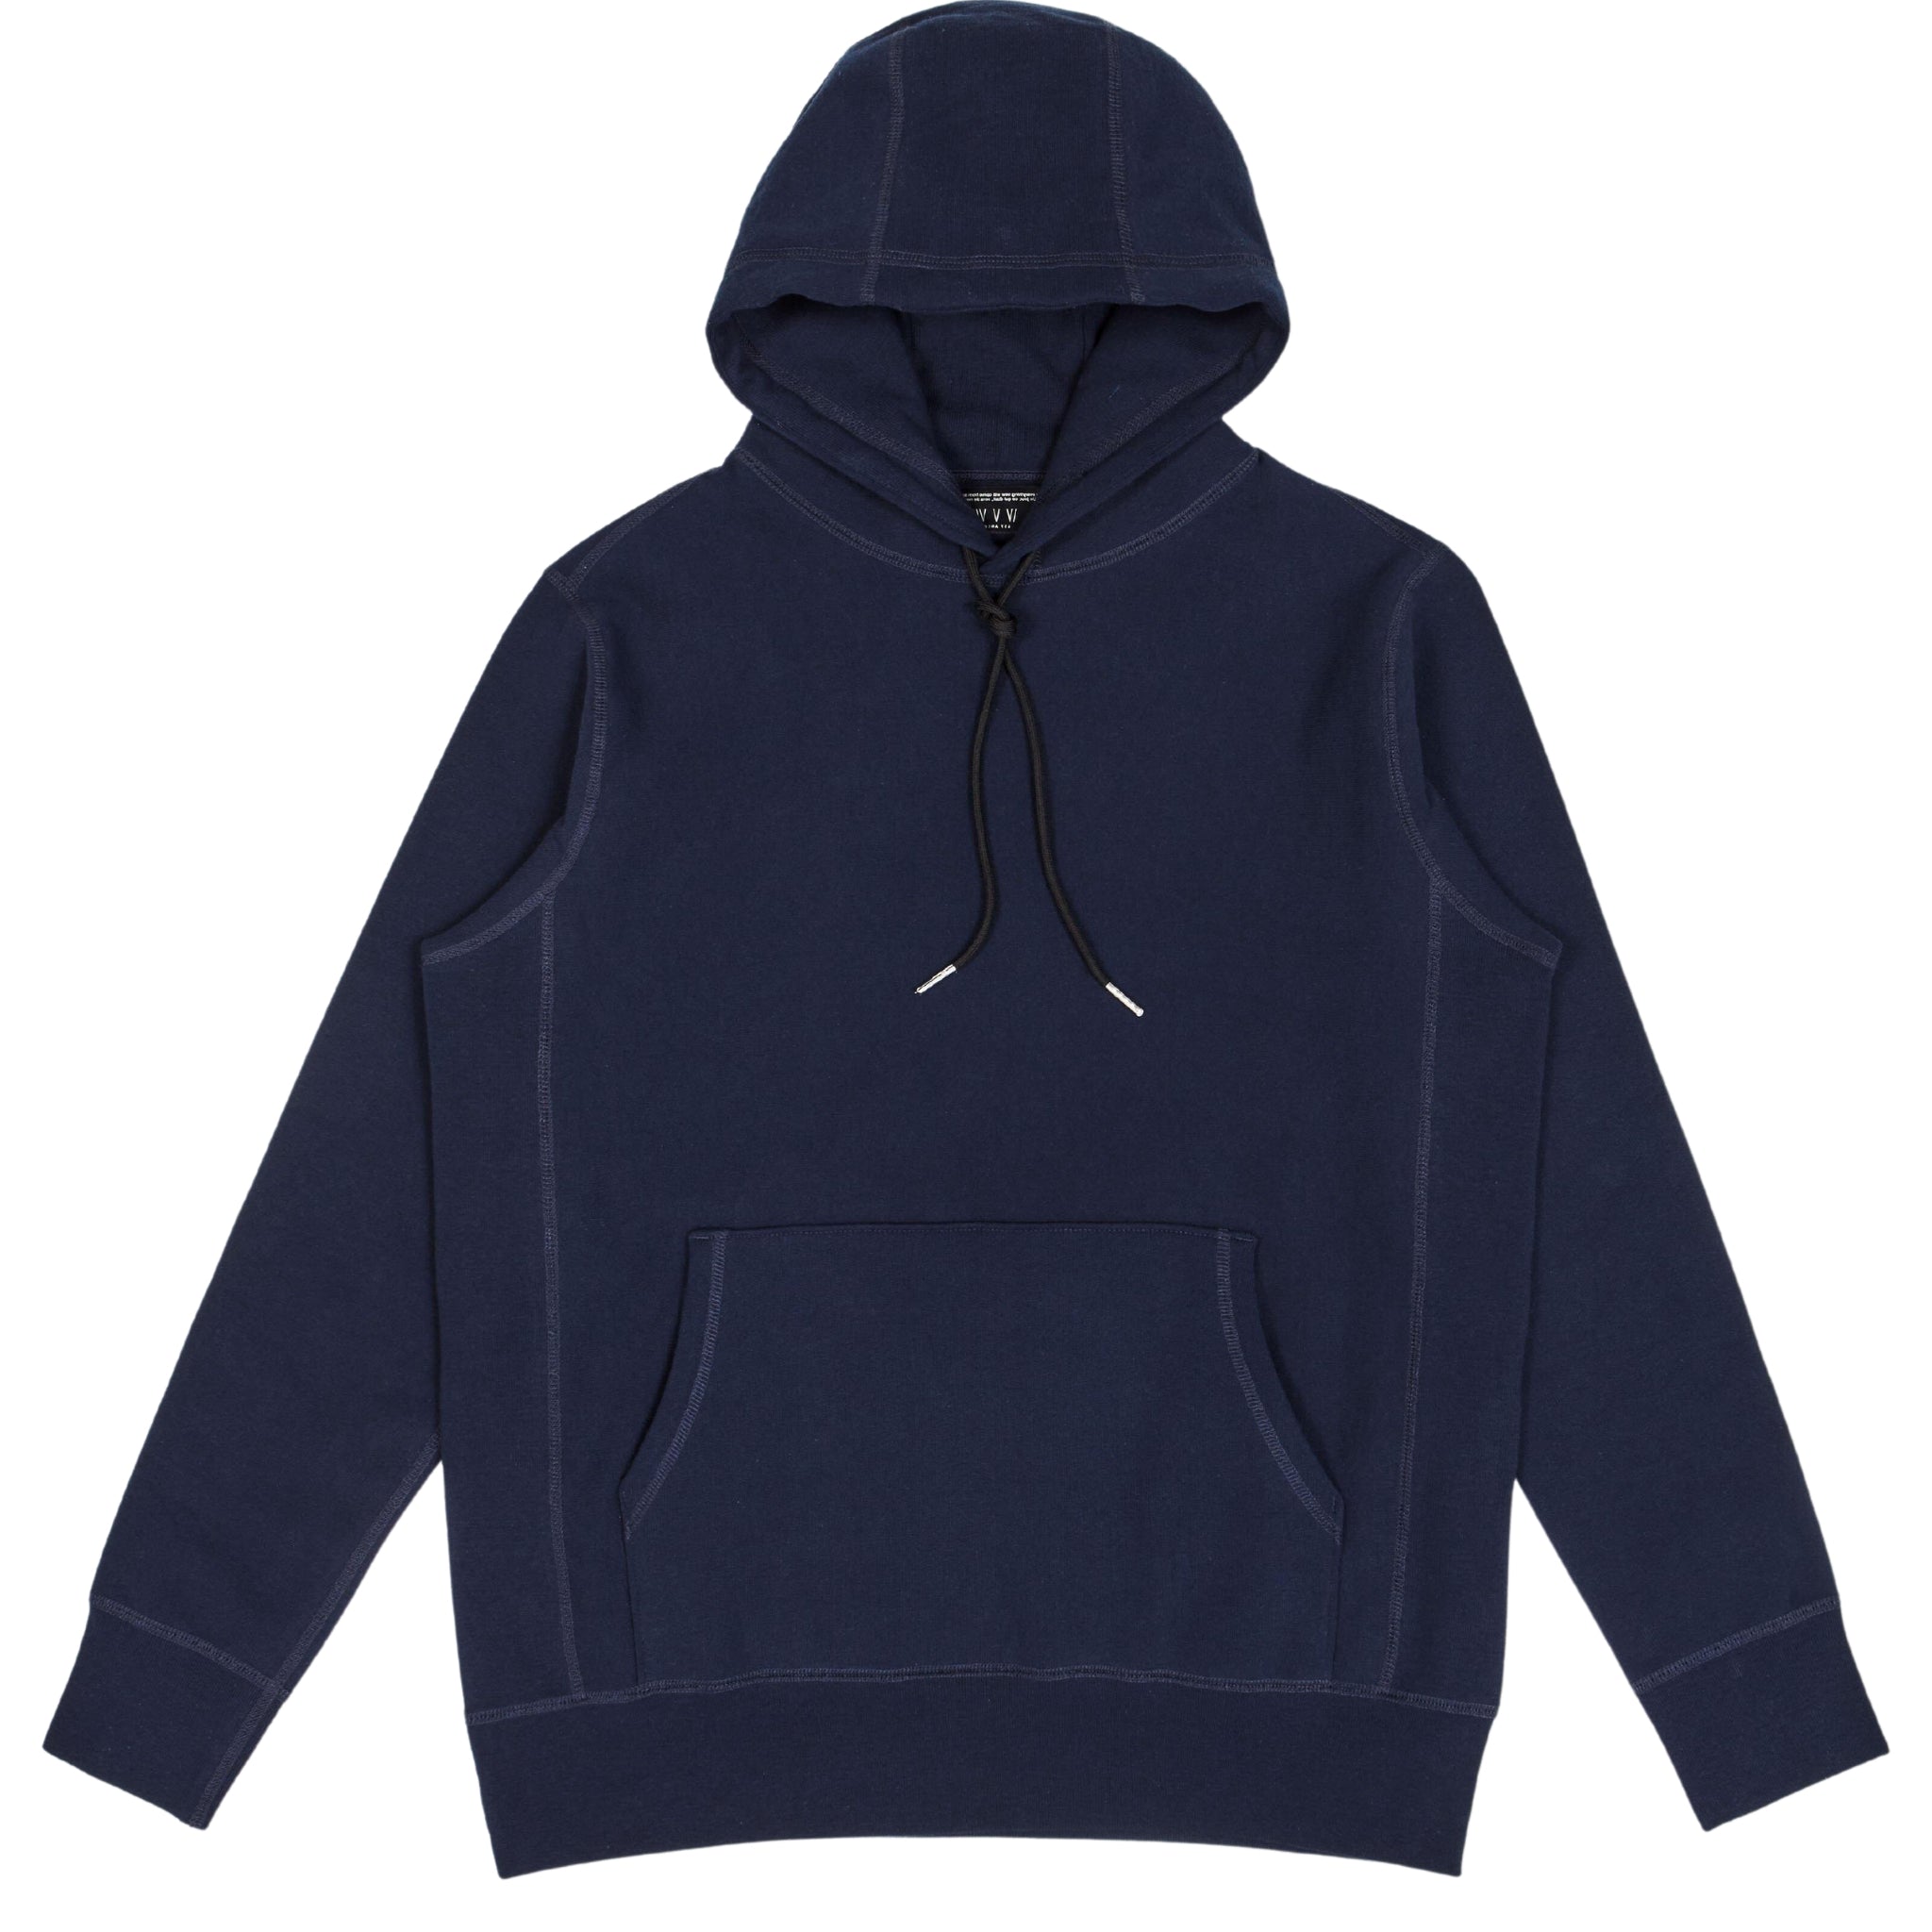 Front view of a Bedi' "second life" program navy hoodie against a white background